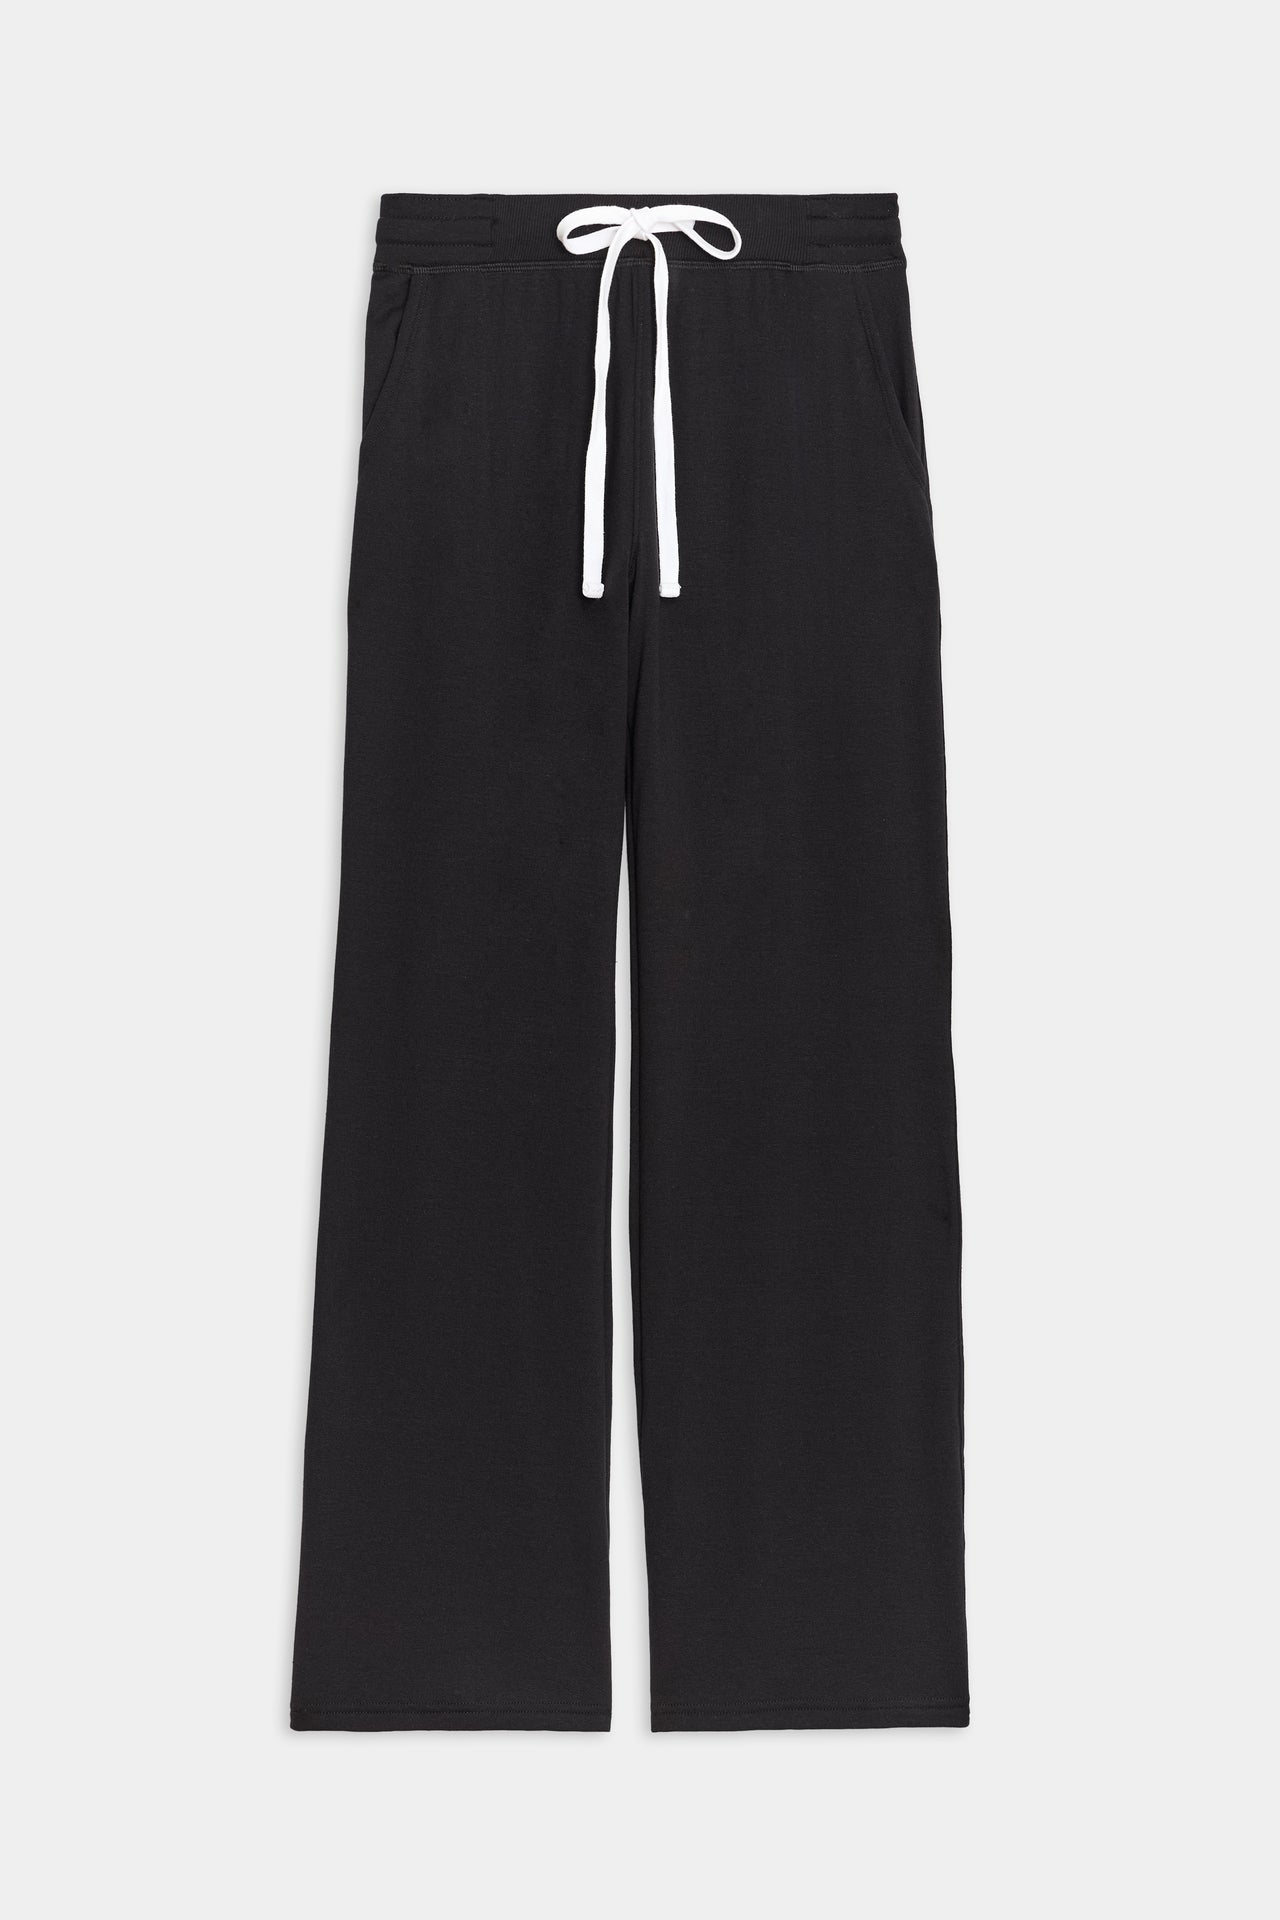 Front flat view of black high rise wide leg relaxed fit sweatpant with side pockets and white drawstring